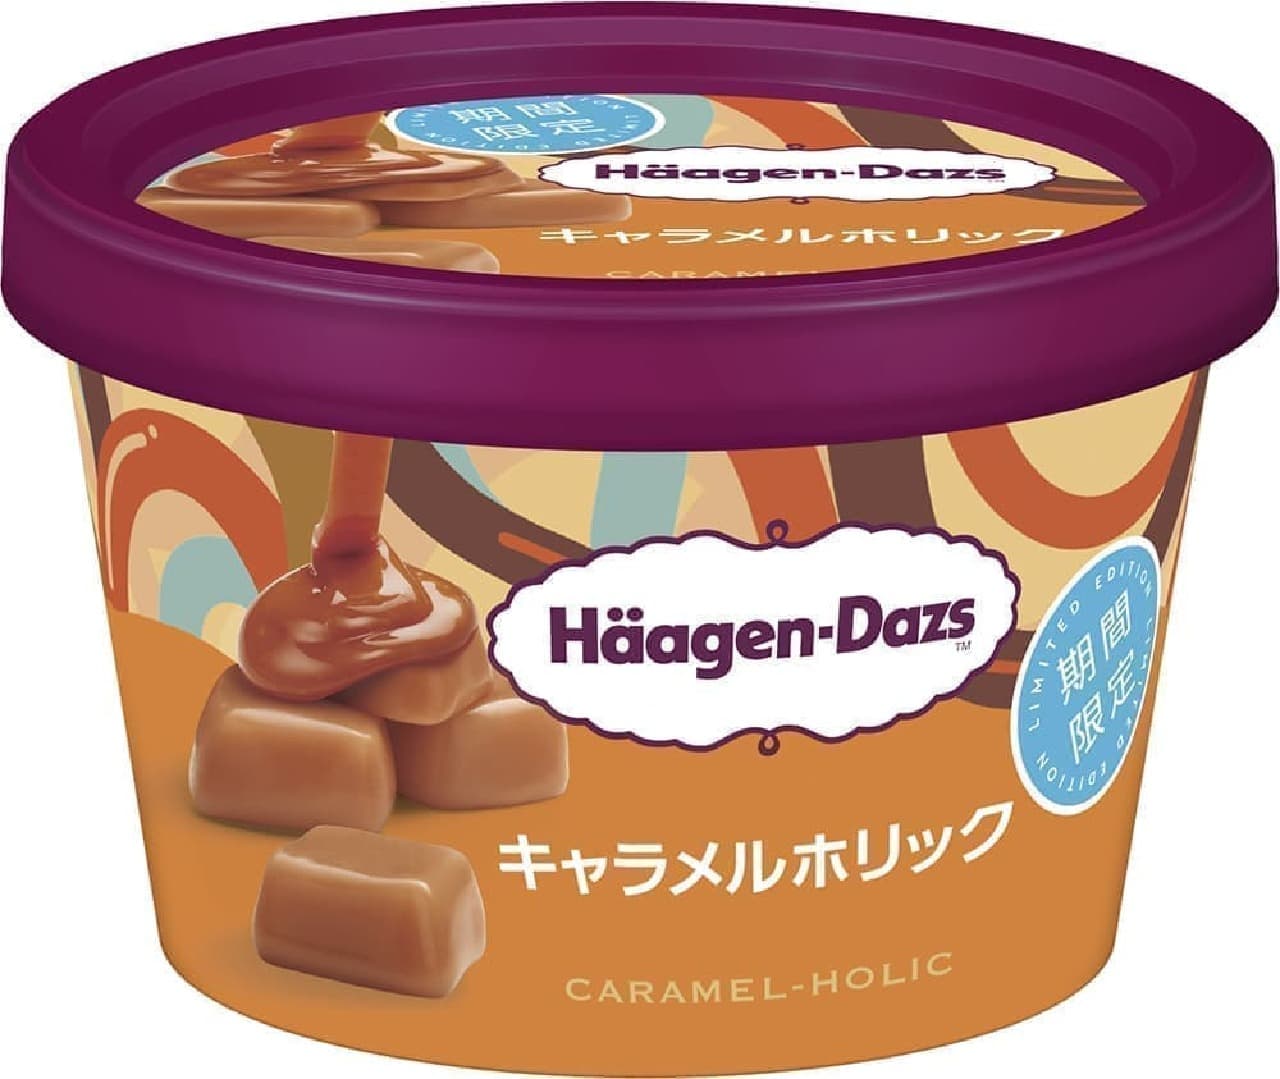 From Haagen-Dazs, a new mini cup product "Caramel Holic"